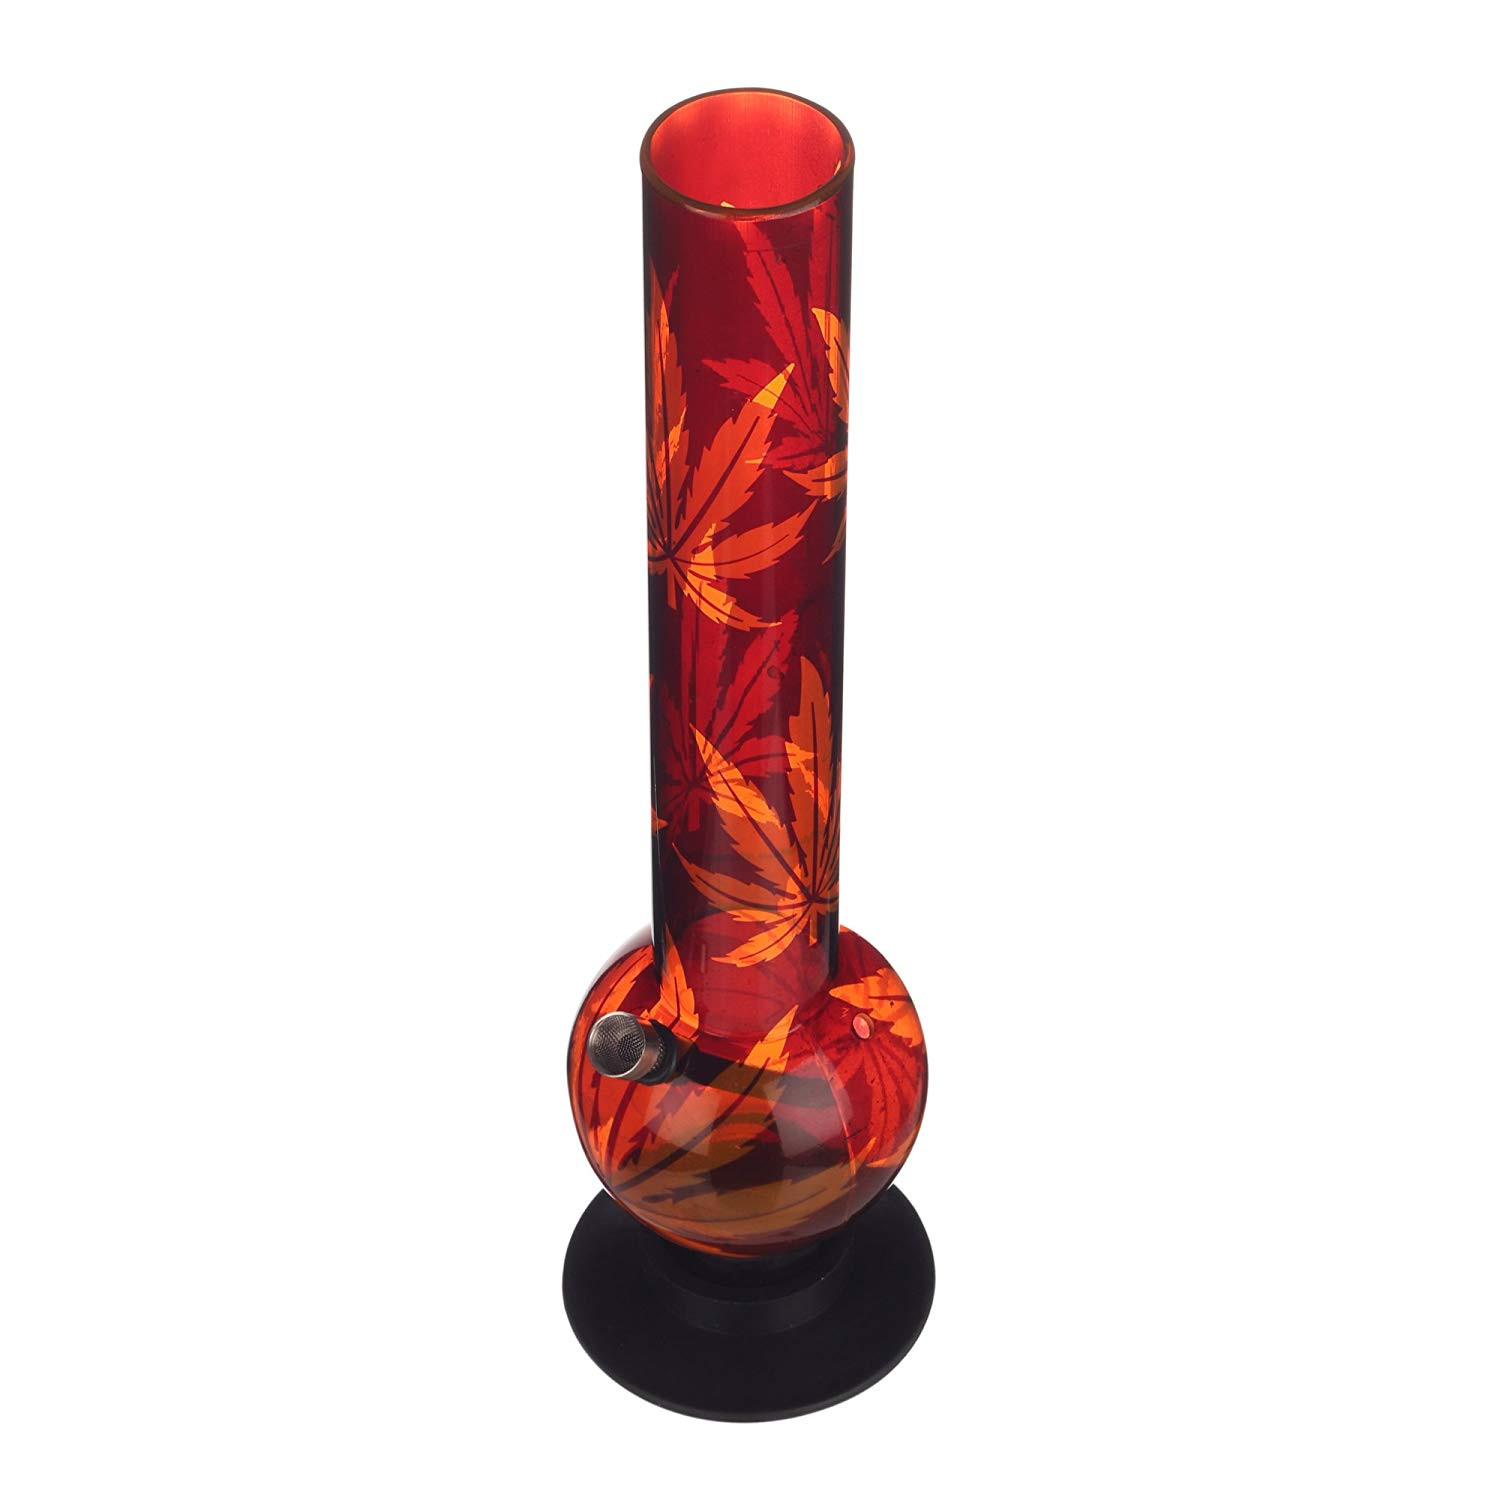 26 Amazing Large Red Vases for Sale 2024 free download large red vases for sale of buy metier moksha 16 inch tall acrylic water bong pipe od 5 0cm throughout buy metier moksha 16 inch tall acrylic water bong pipe od 5 0cm waterpipe hookah transp